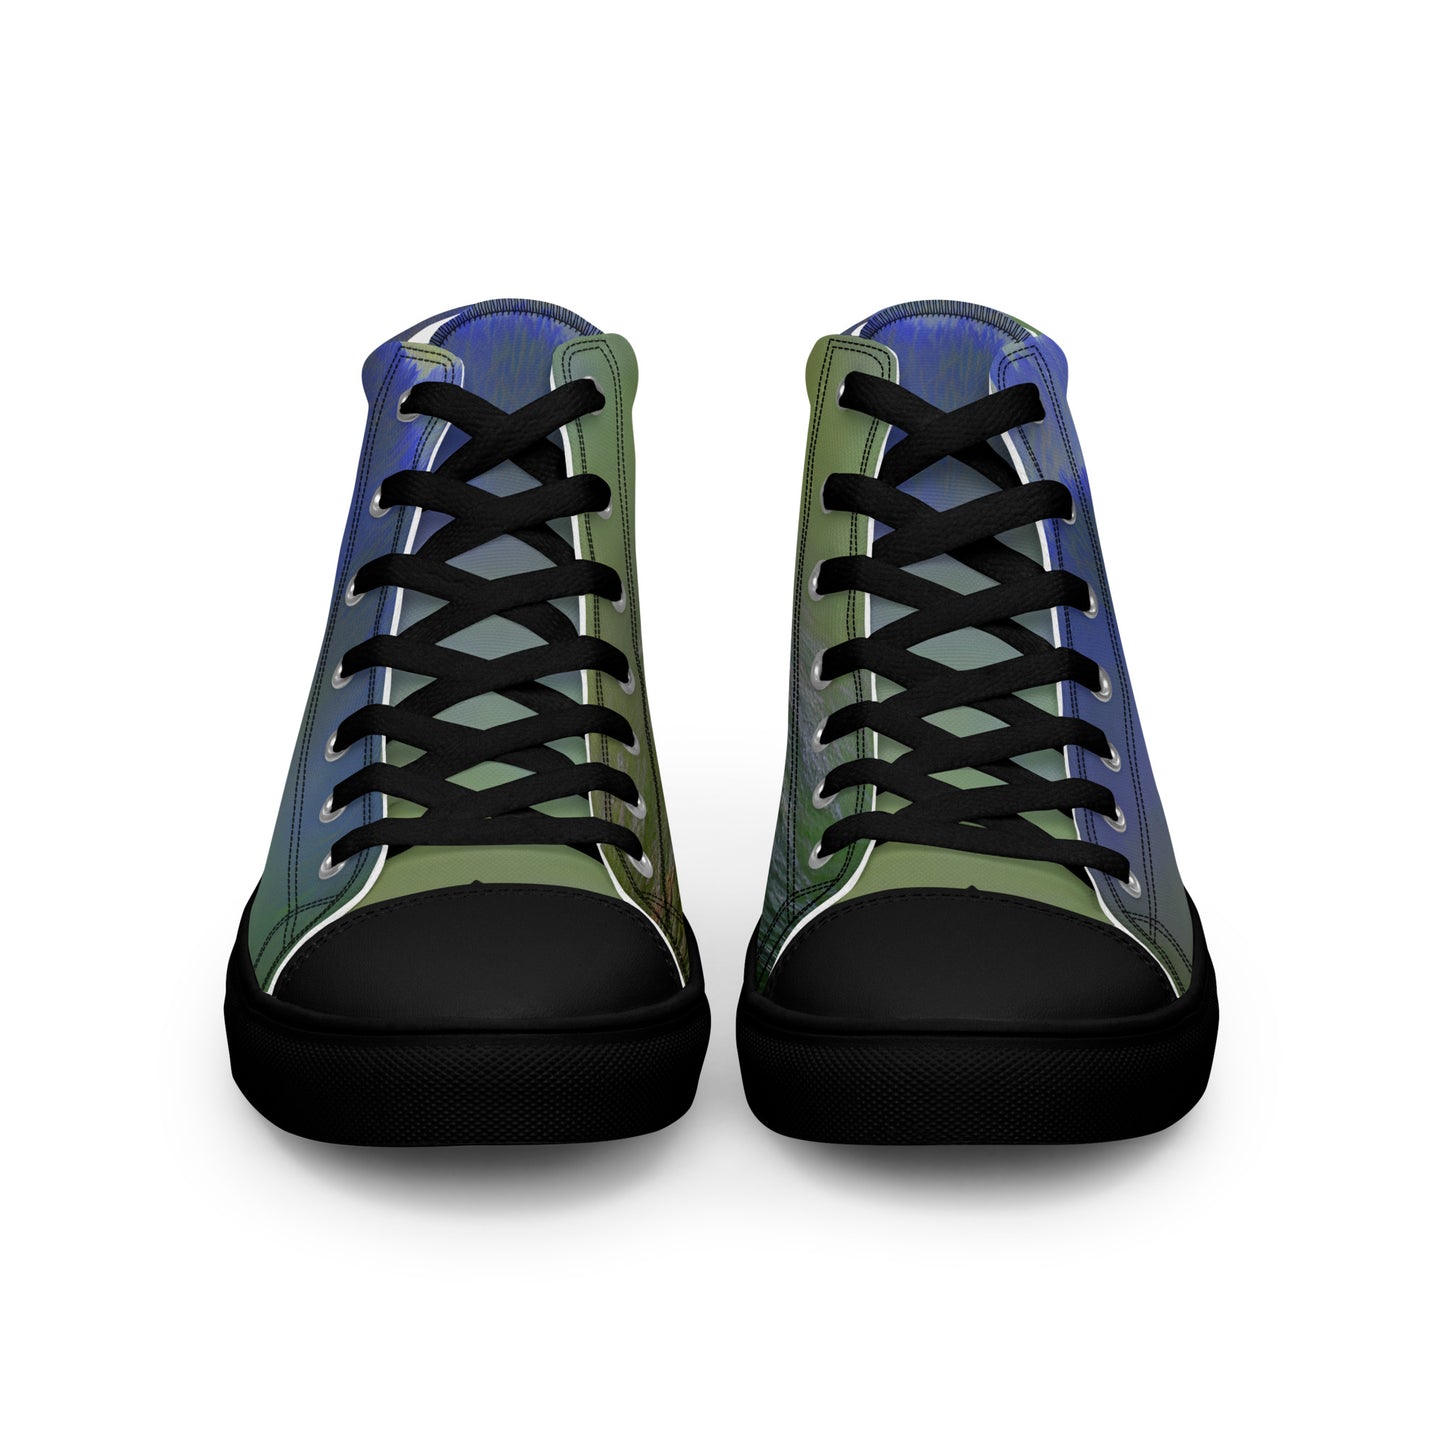 Elevate Your Style with Our Teal Abstract Men's High Top Shoes - Shop Now!